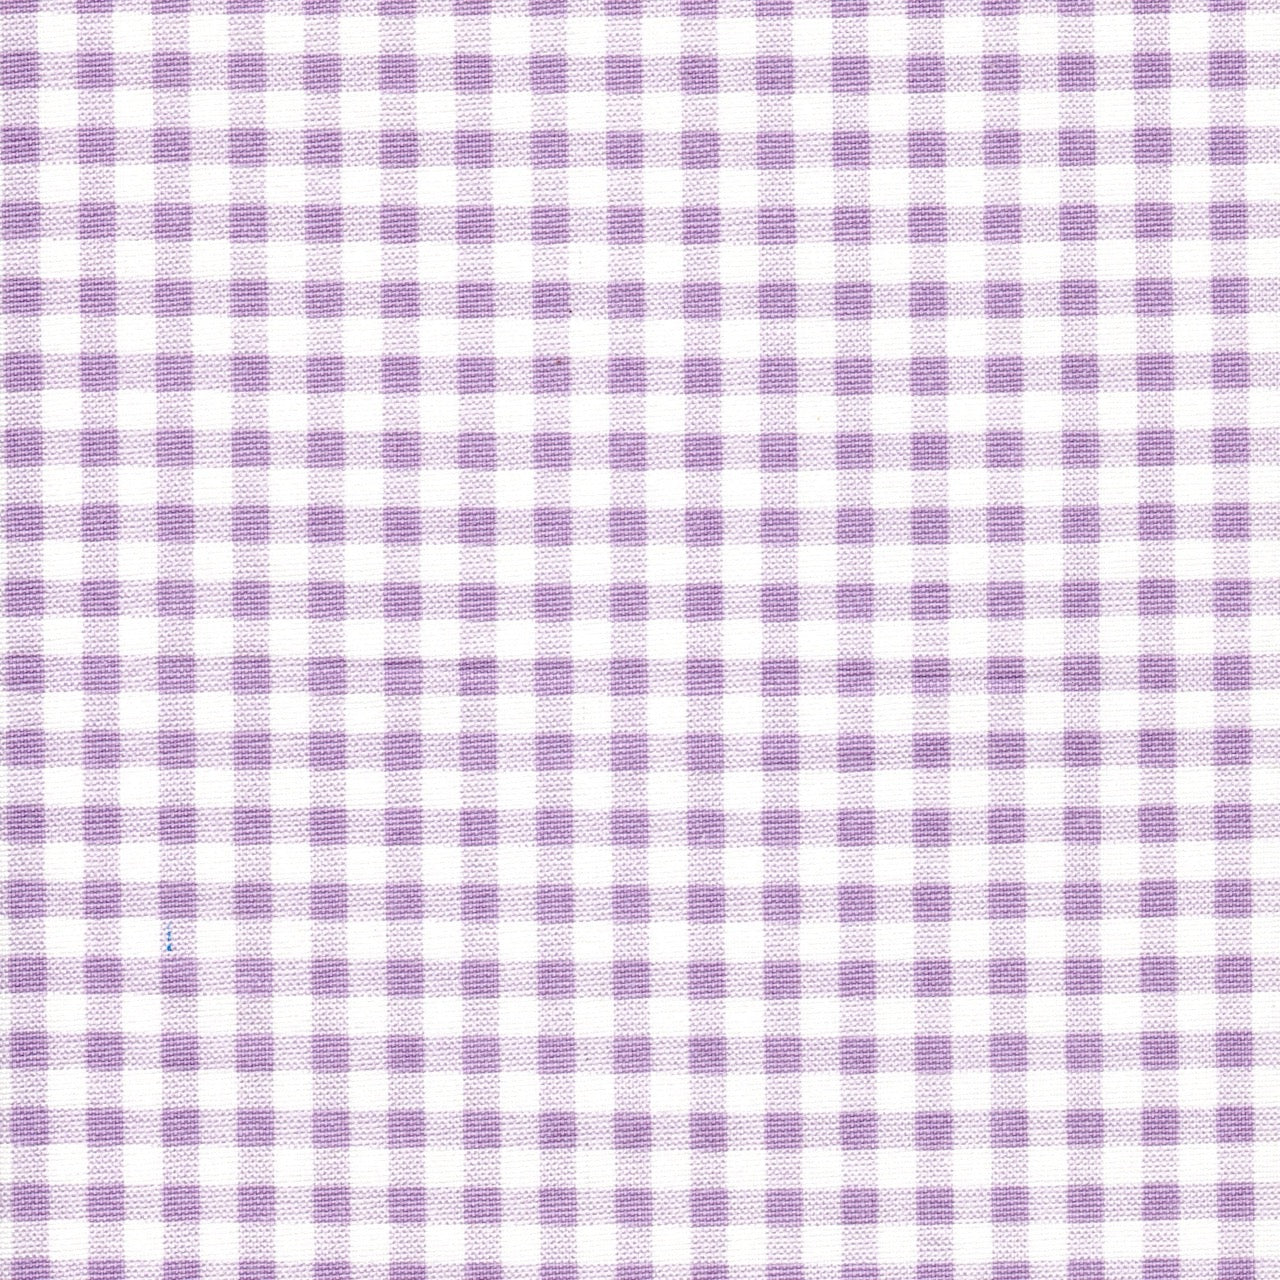 Tab Top Curtains in Orchid Large Gingham Check on White